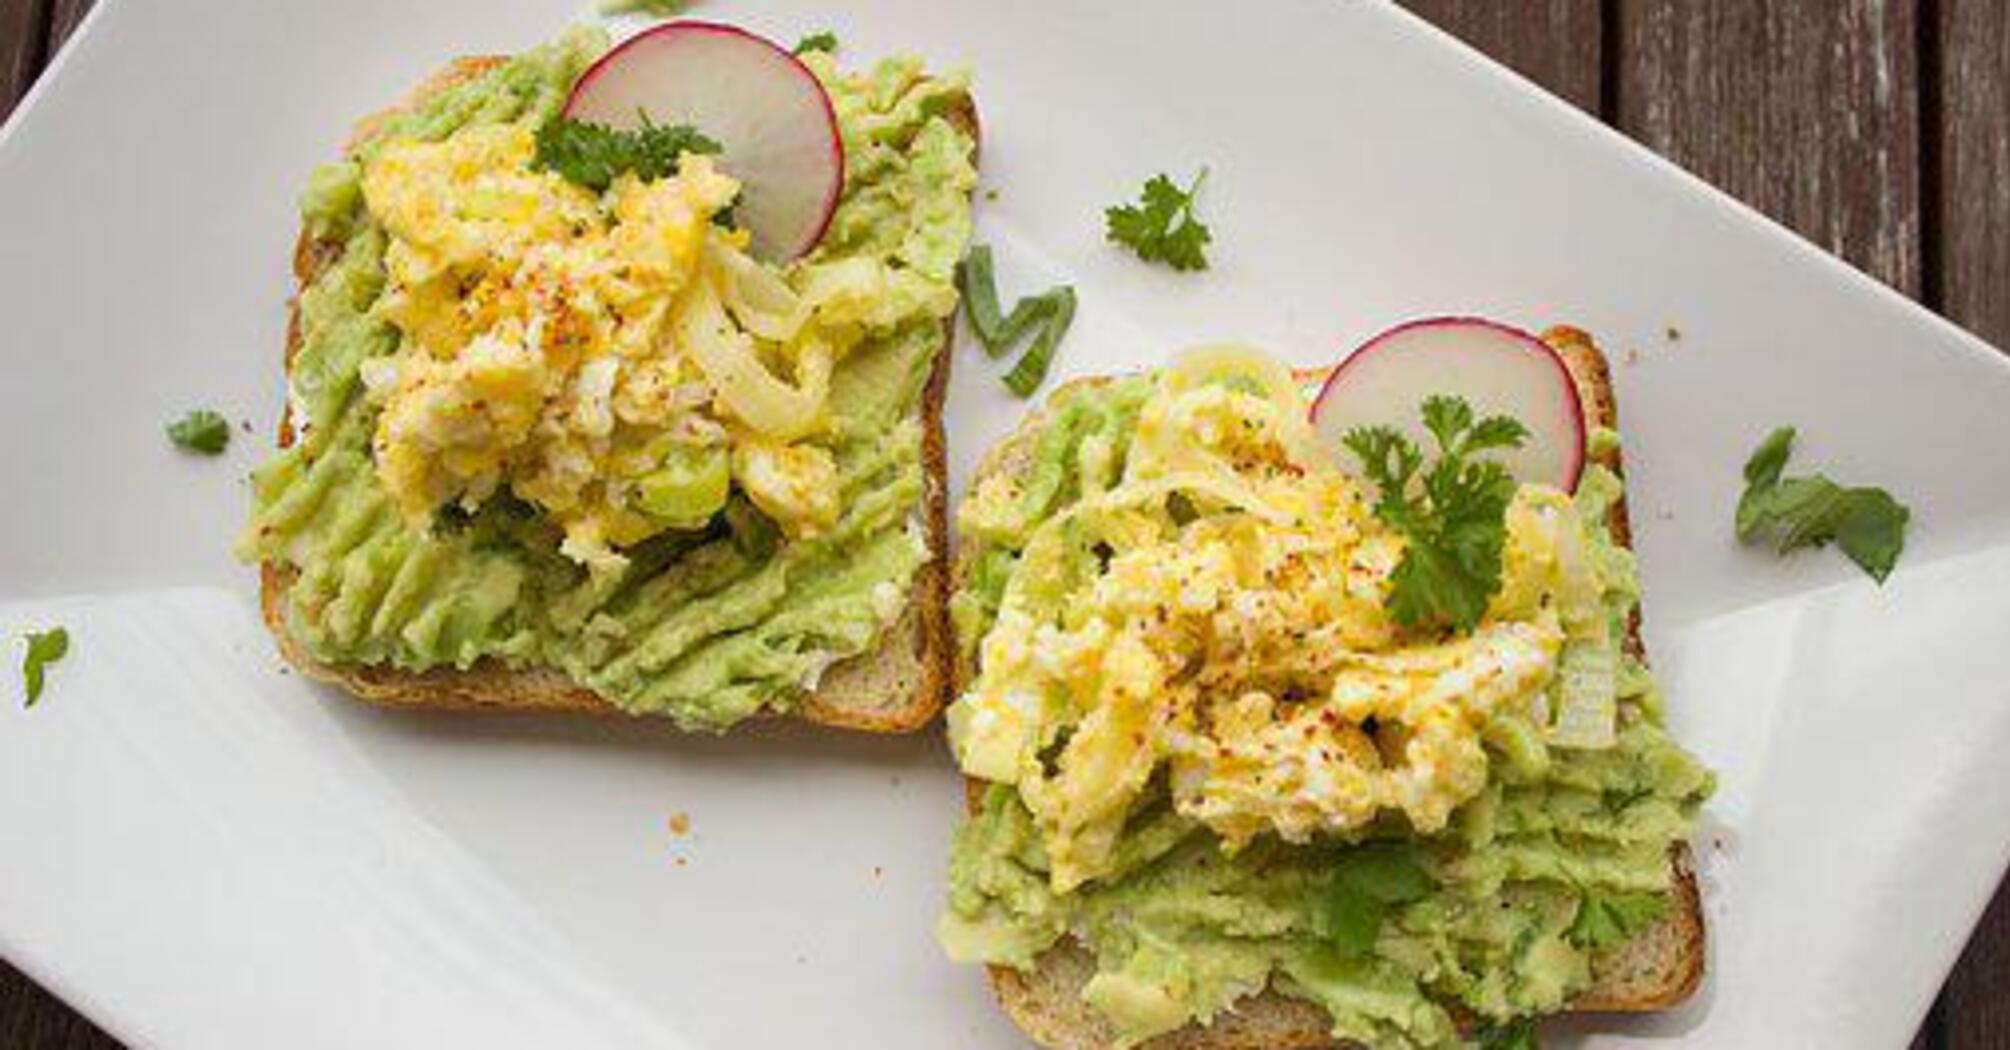 Avocado spread for bread, toast and croutons: 2 of the most popular recipes